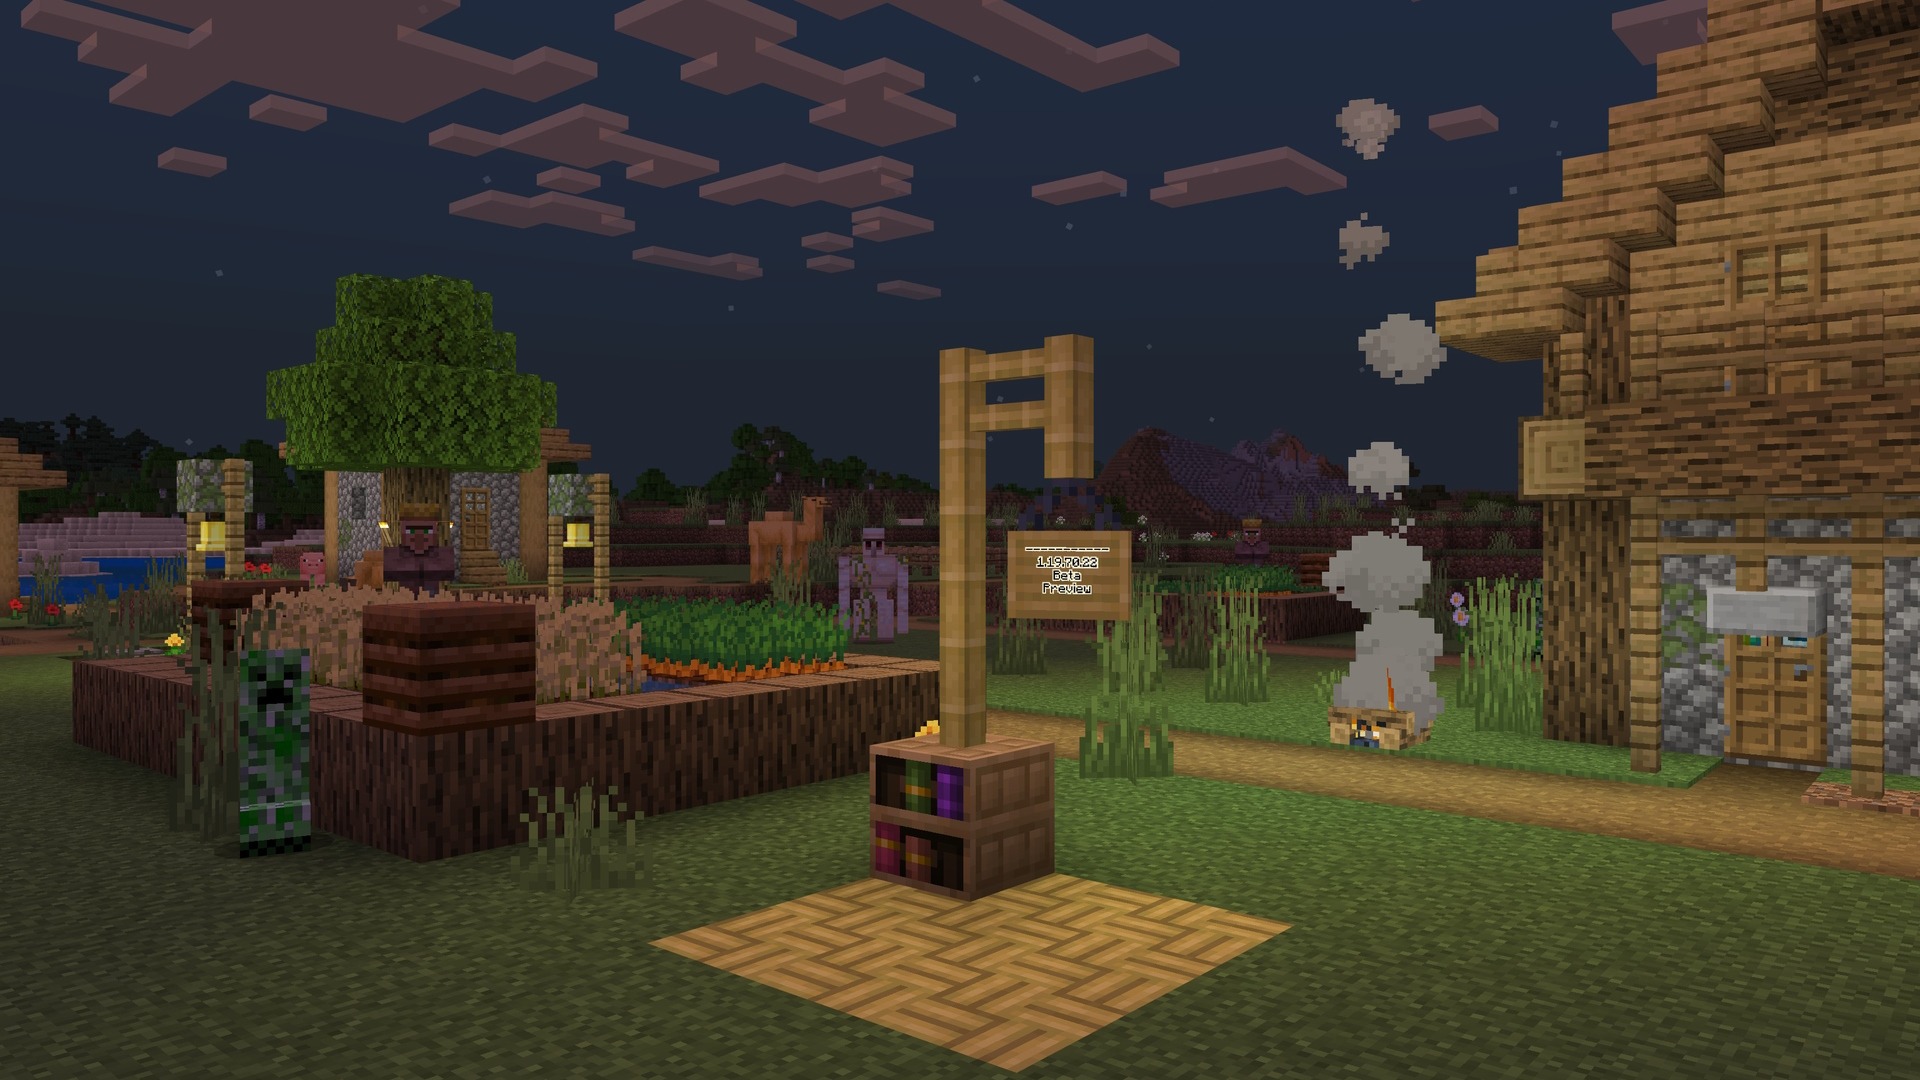 A Minecraft screenshot of a village with mobs.